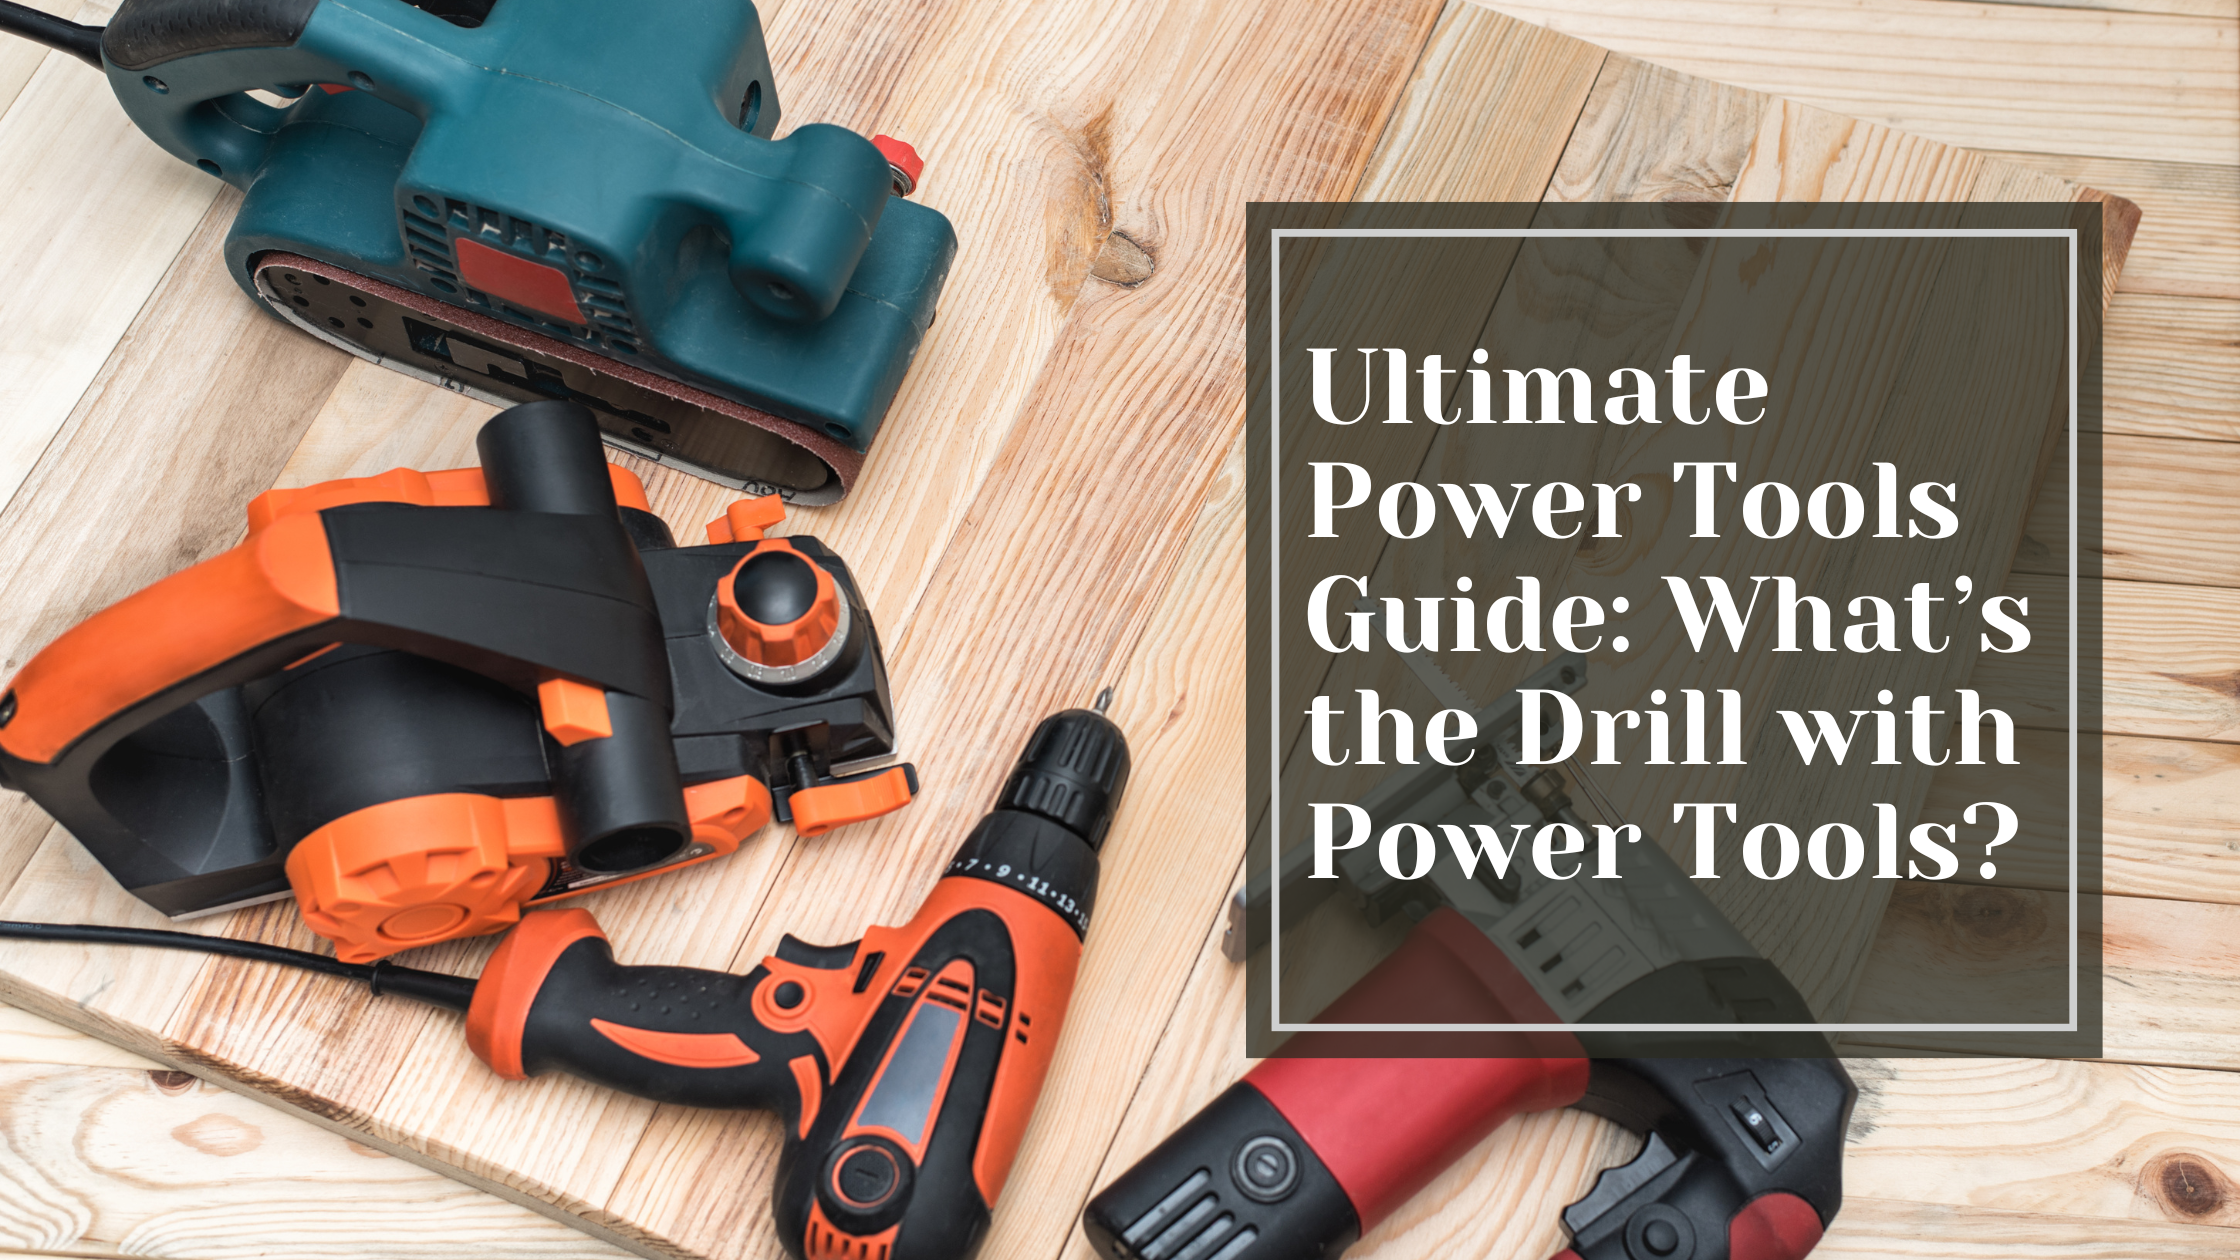 Ultimate Power Tools Guide: What’s the Drill with Power Tools?